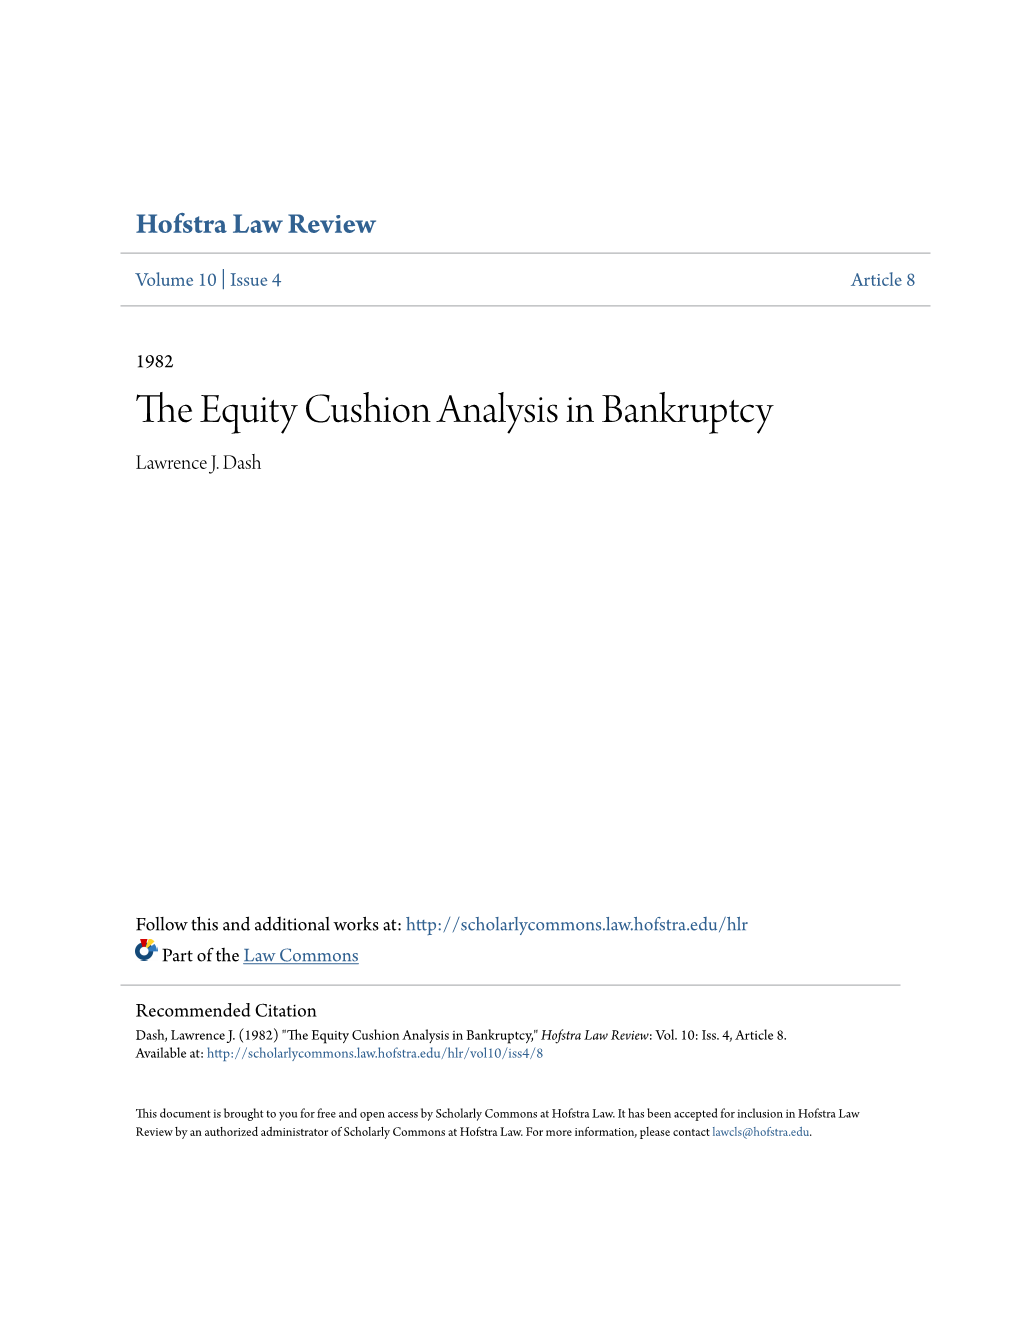 The Equity Cushion Analysis in Bankruptcy